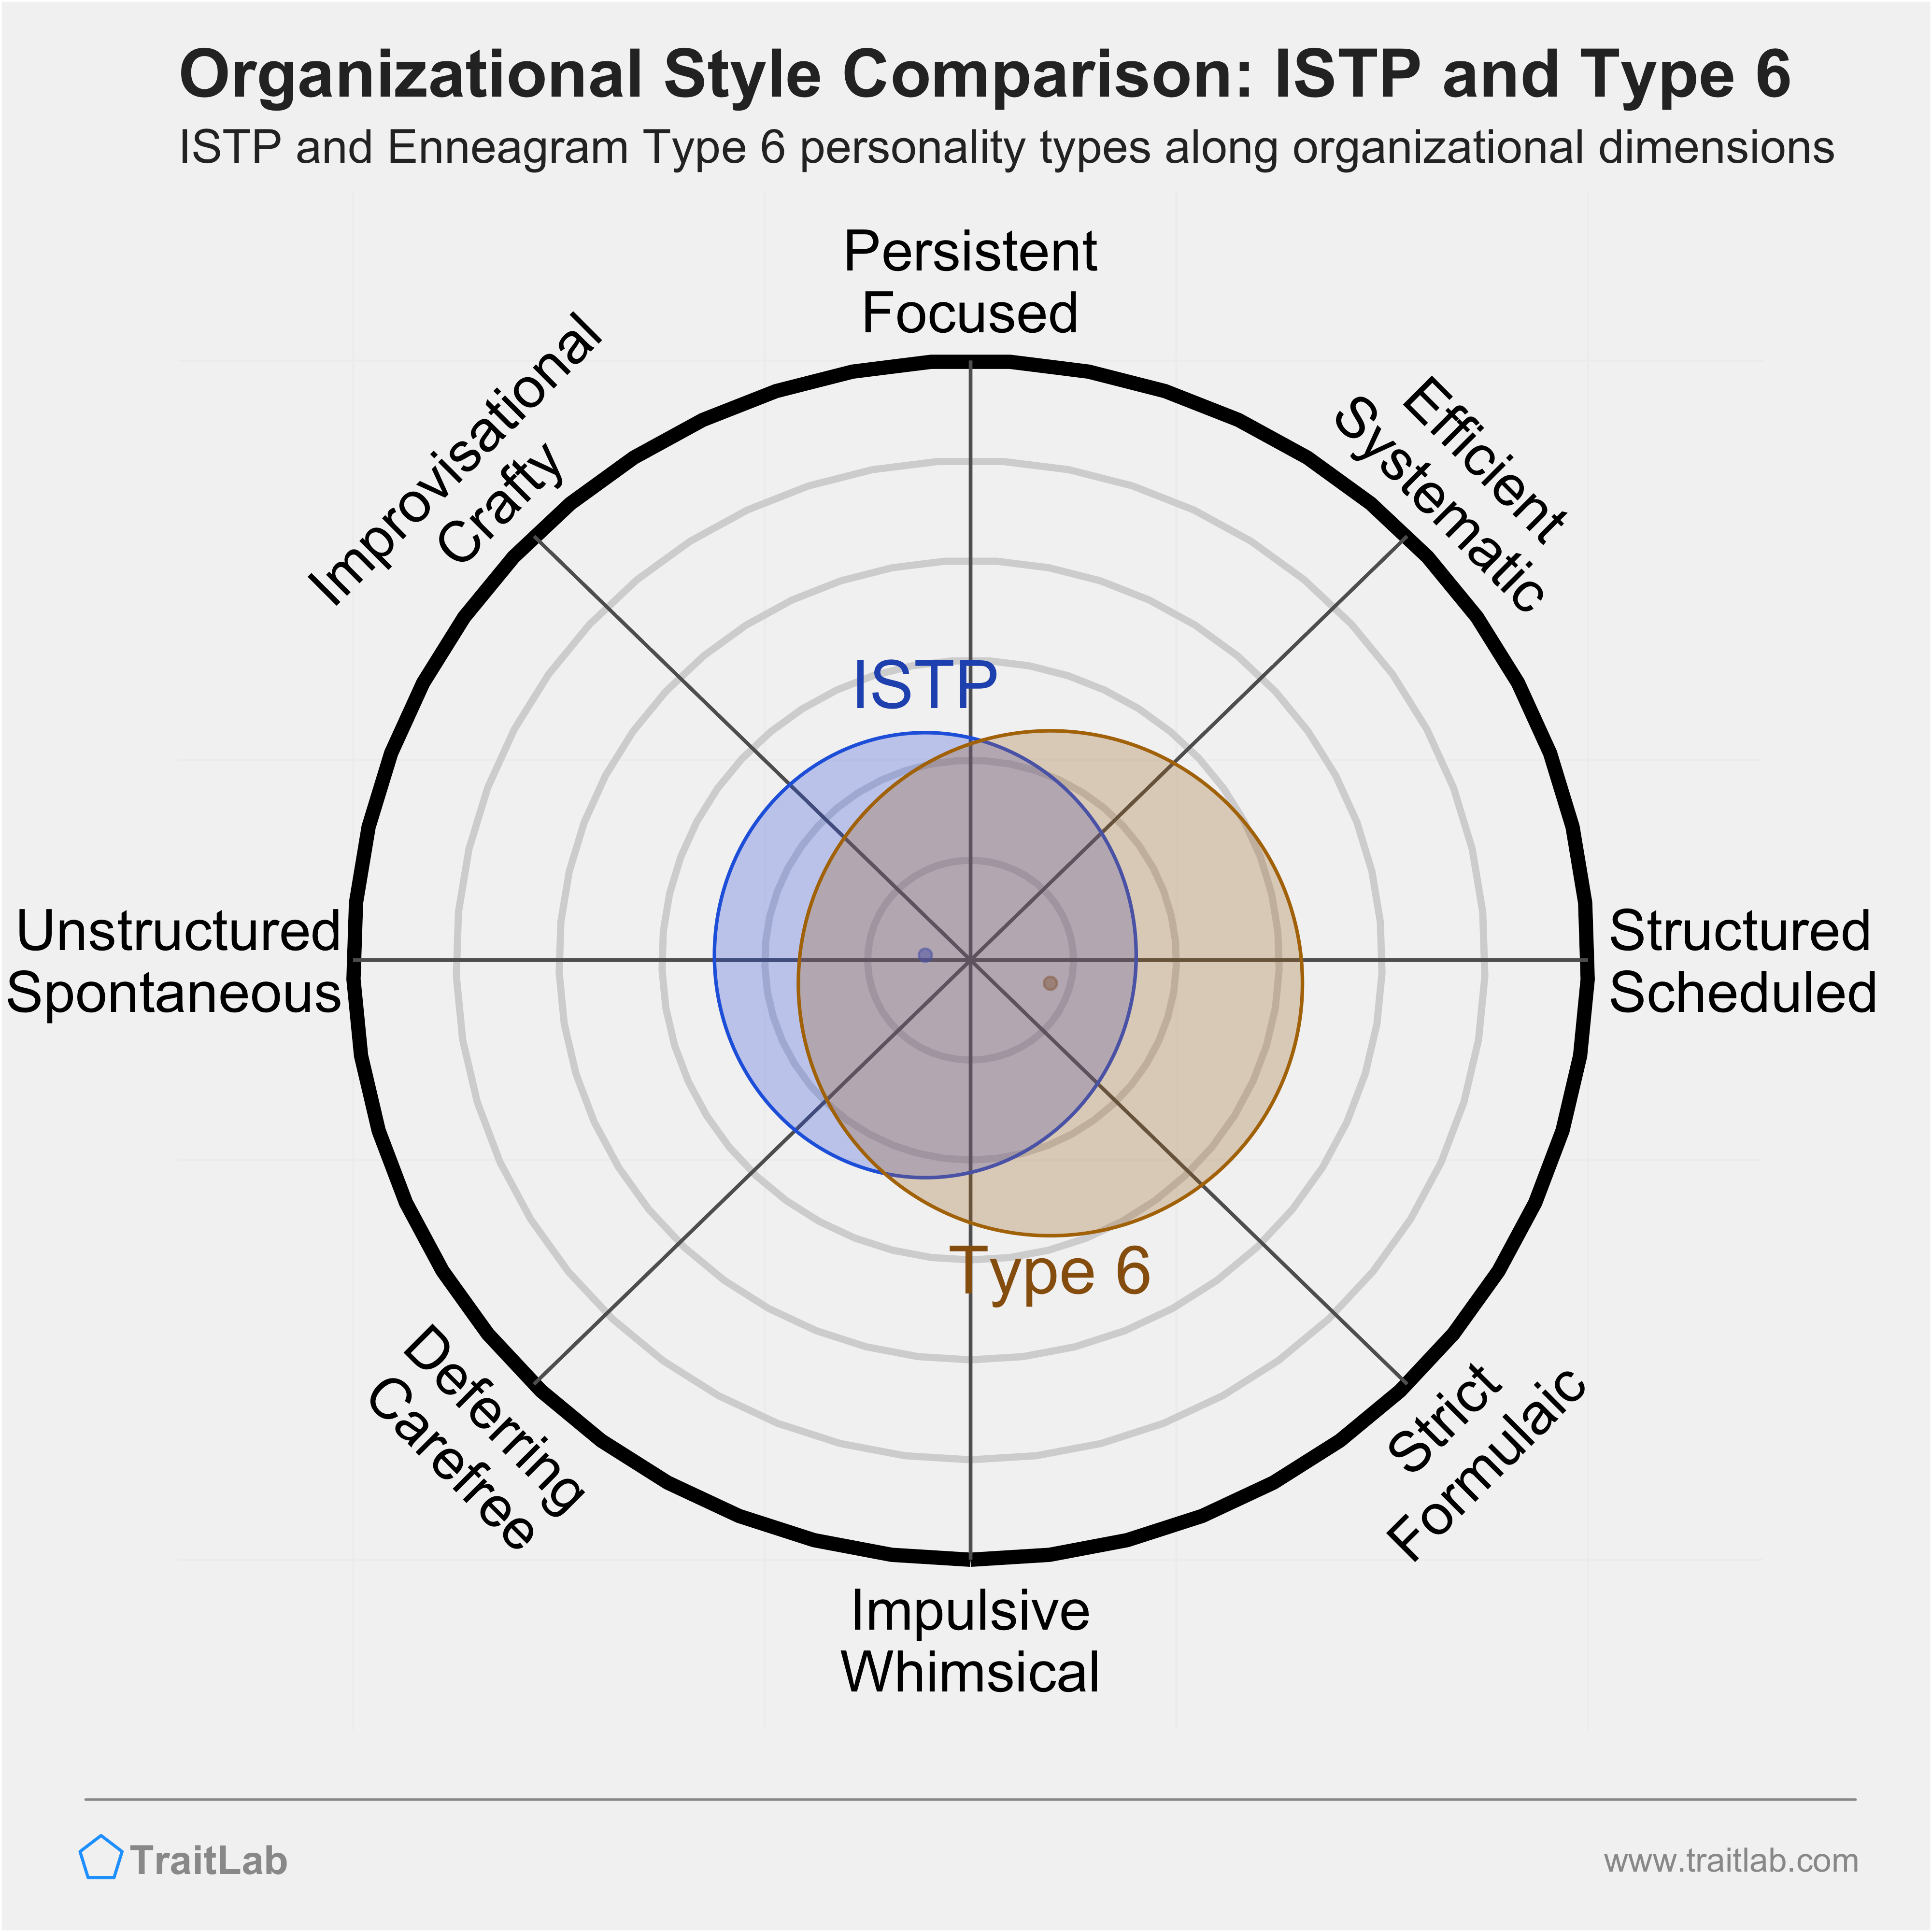 ISTP and Type 6 comparison across organizational dimensions